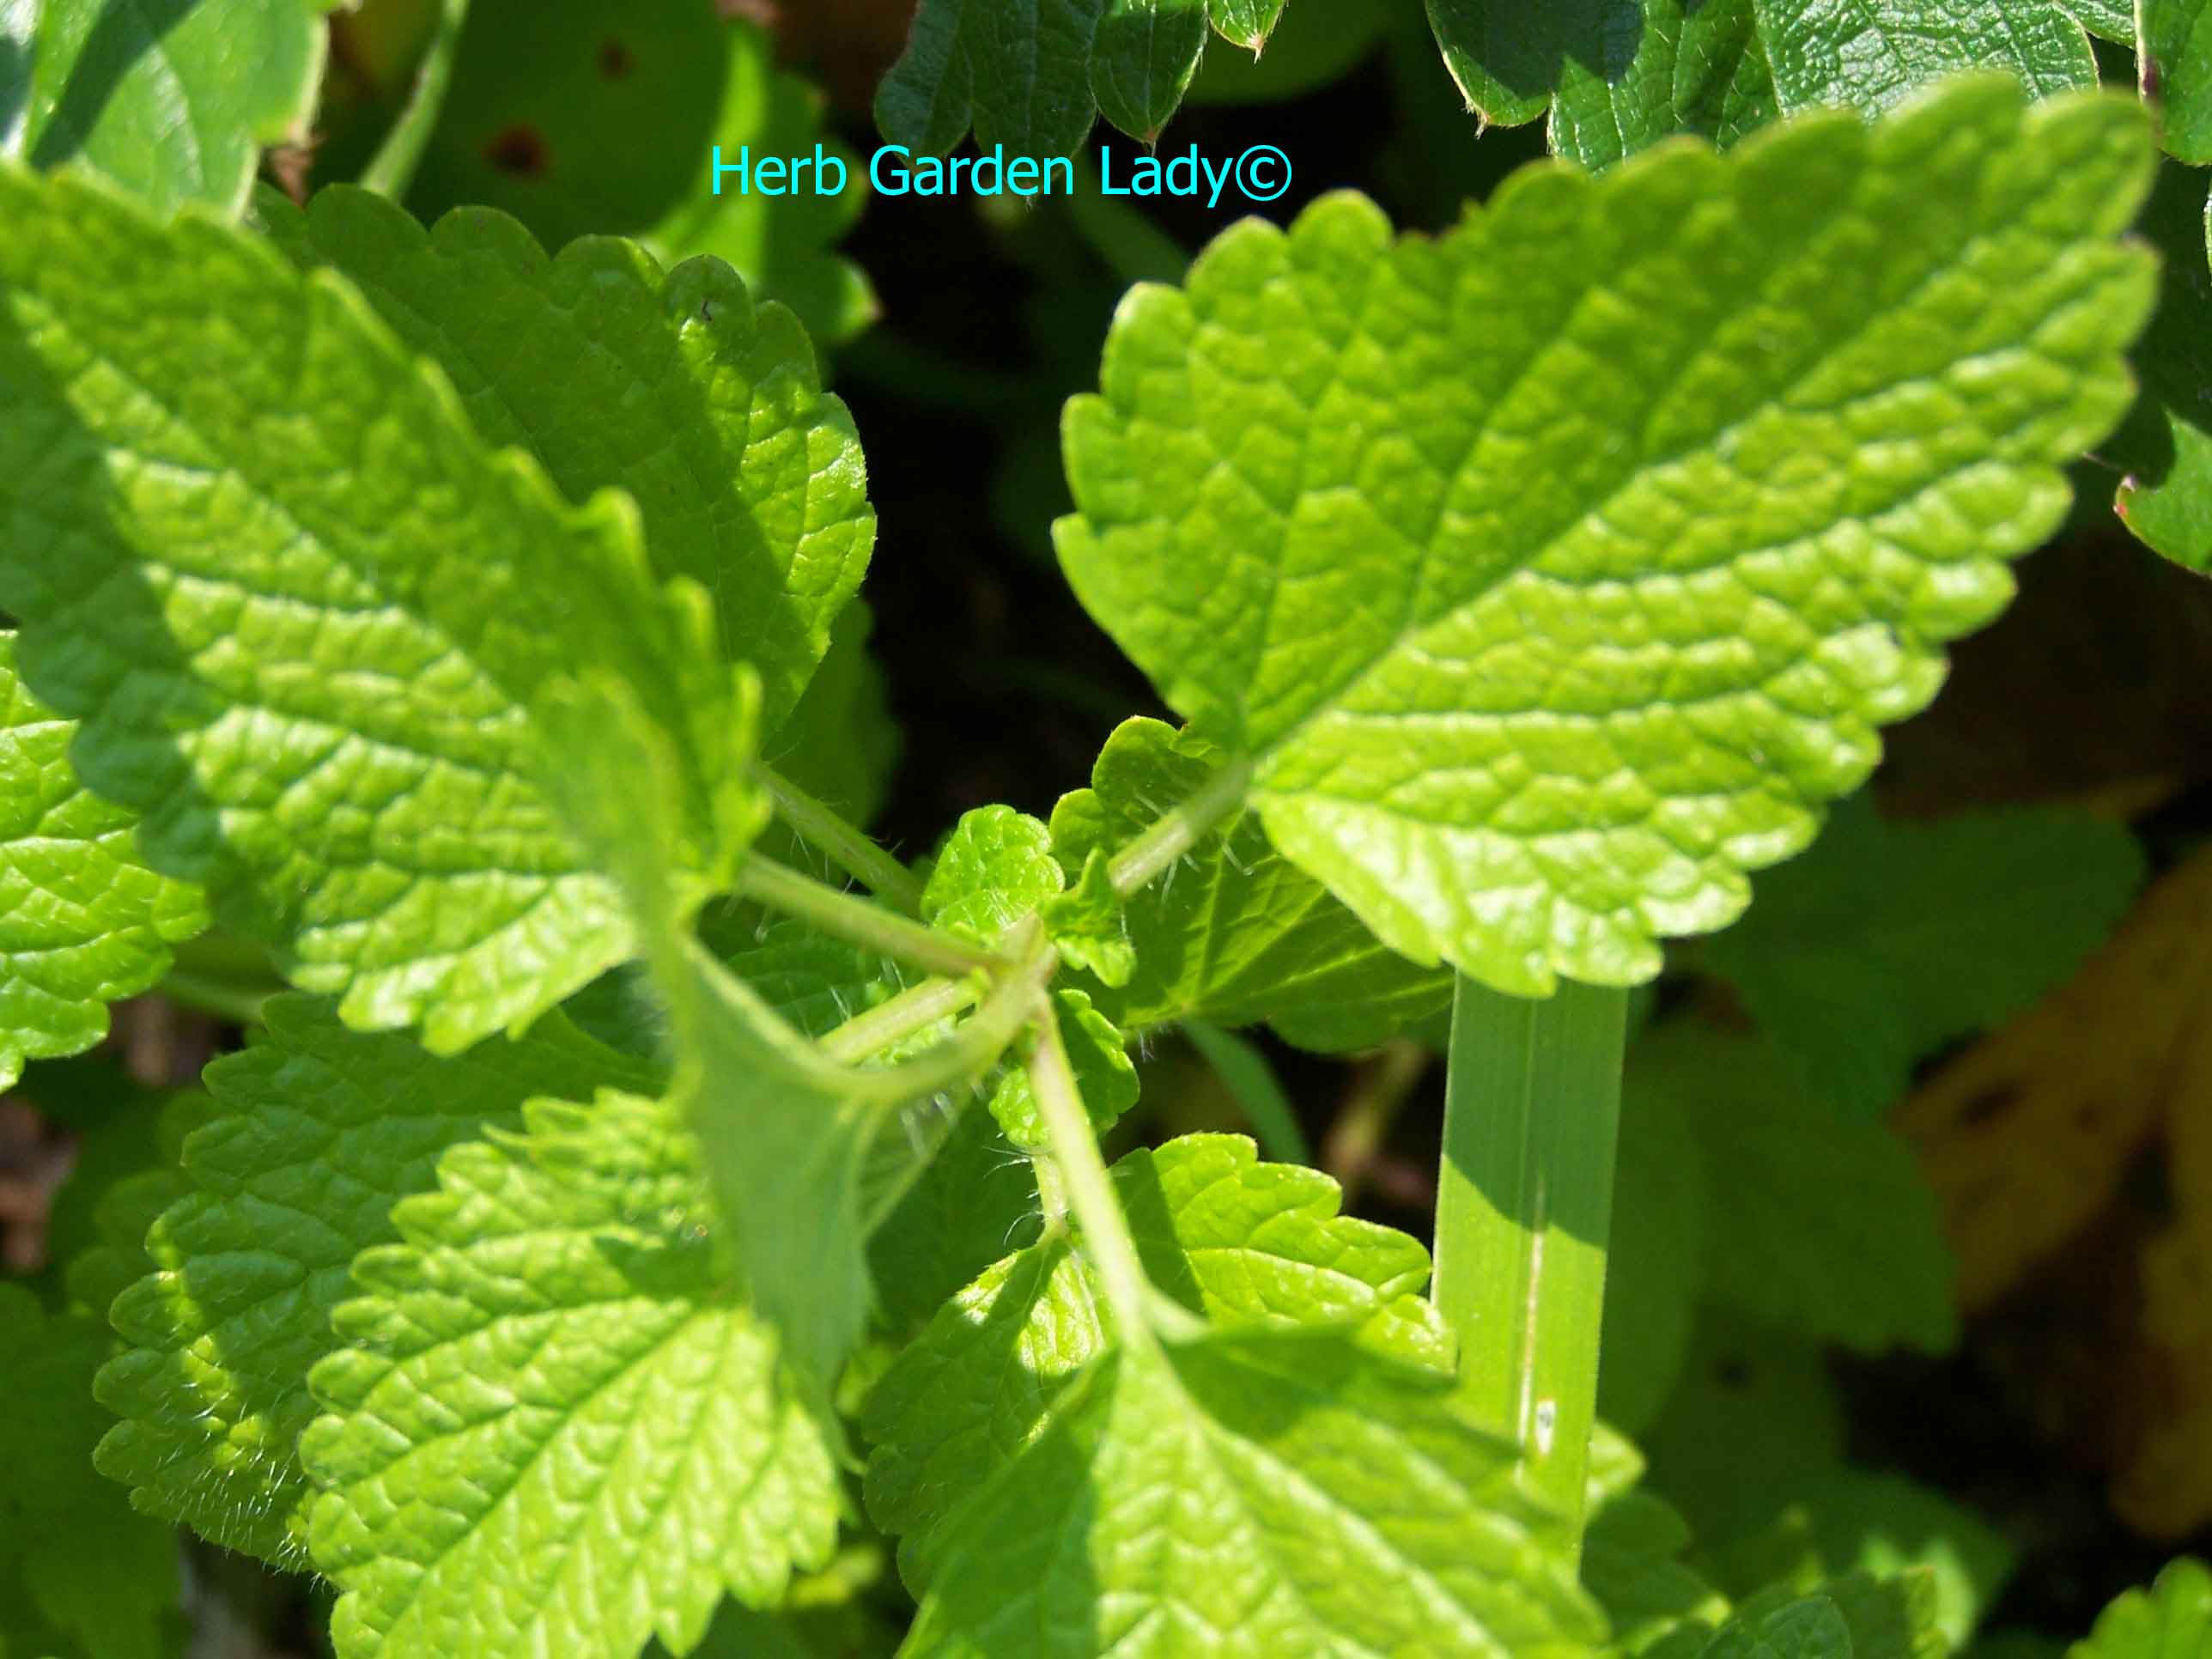 Melissa also known as lemon balm is used in aromatherapy for digestion, fever, menstrual problems, nervous tension, neuralgia and respiratory problems.